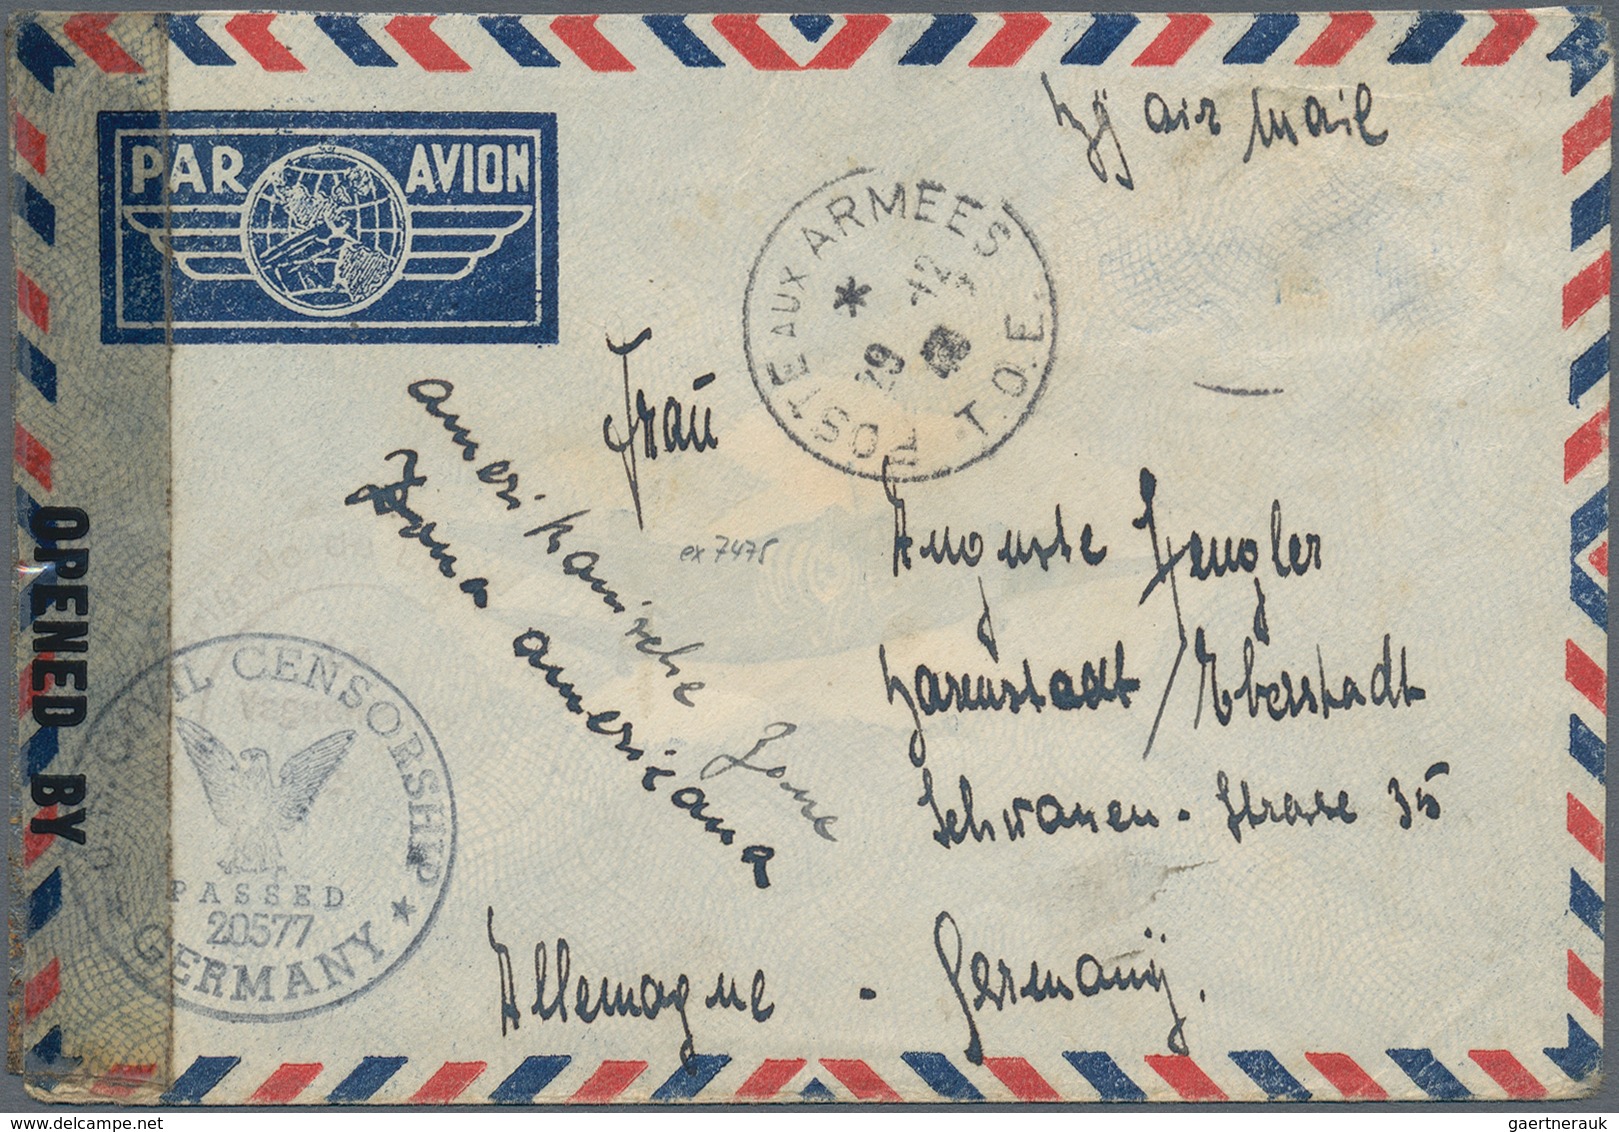 Französisch-Indochina: 1892/1954, sophisticated balance of apprx. 140 covers/cards, showing a nice r